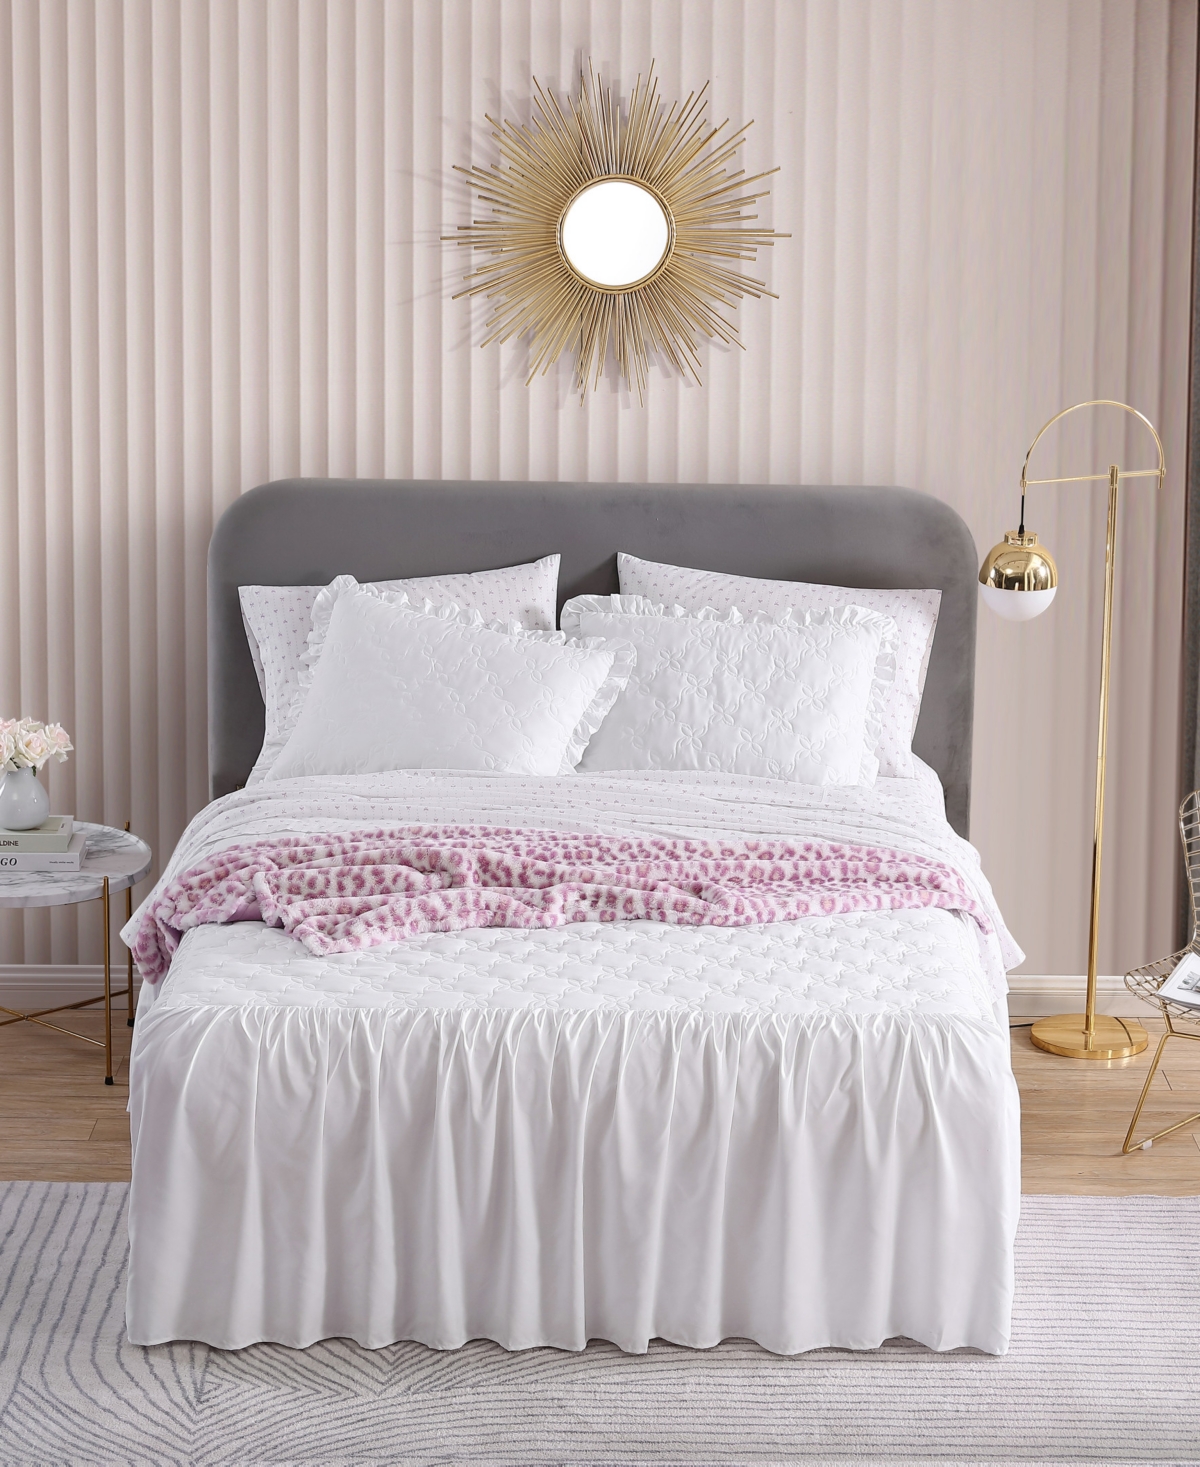 Betsey Johnson 3 Piece Solid Microfiber Bedspread Set, Full Bedding In White